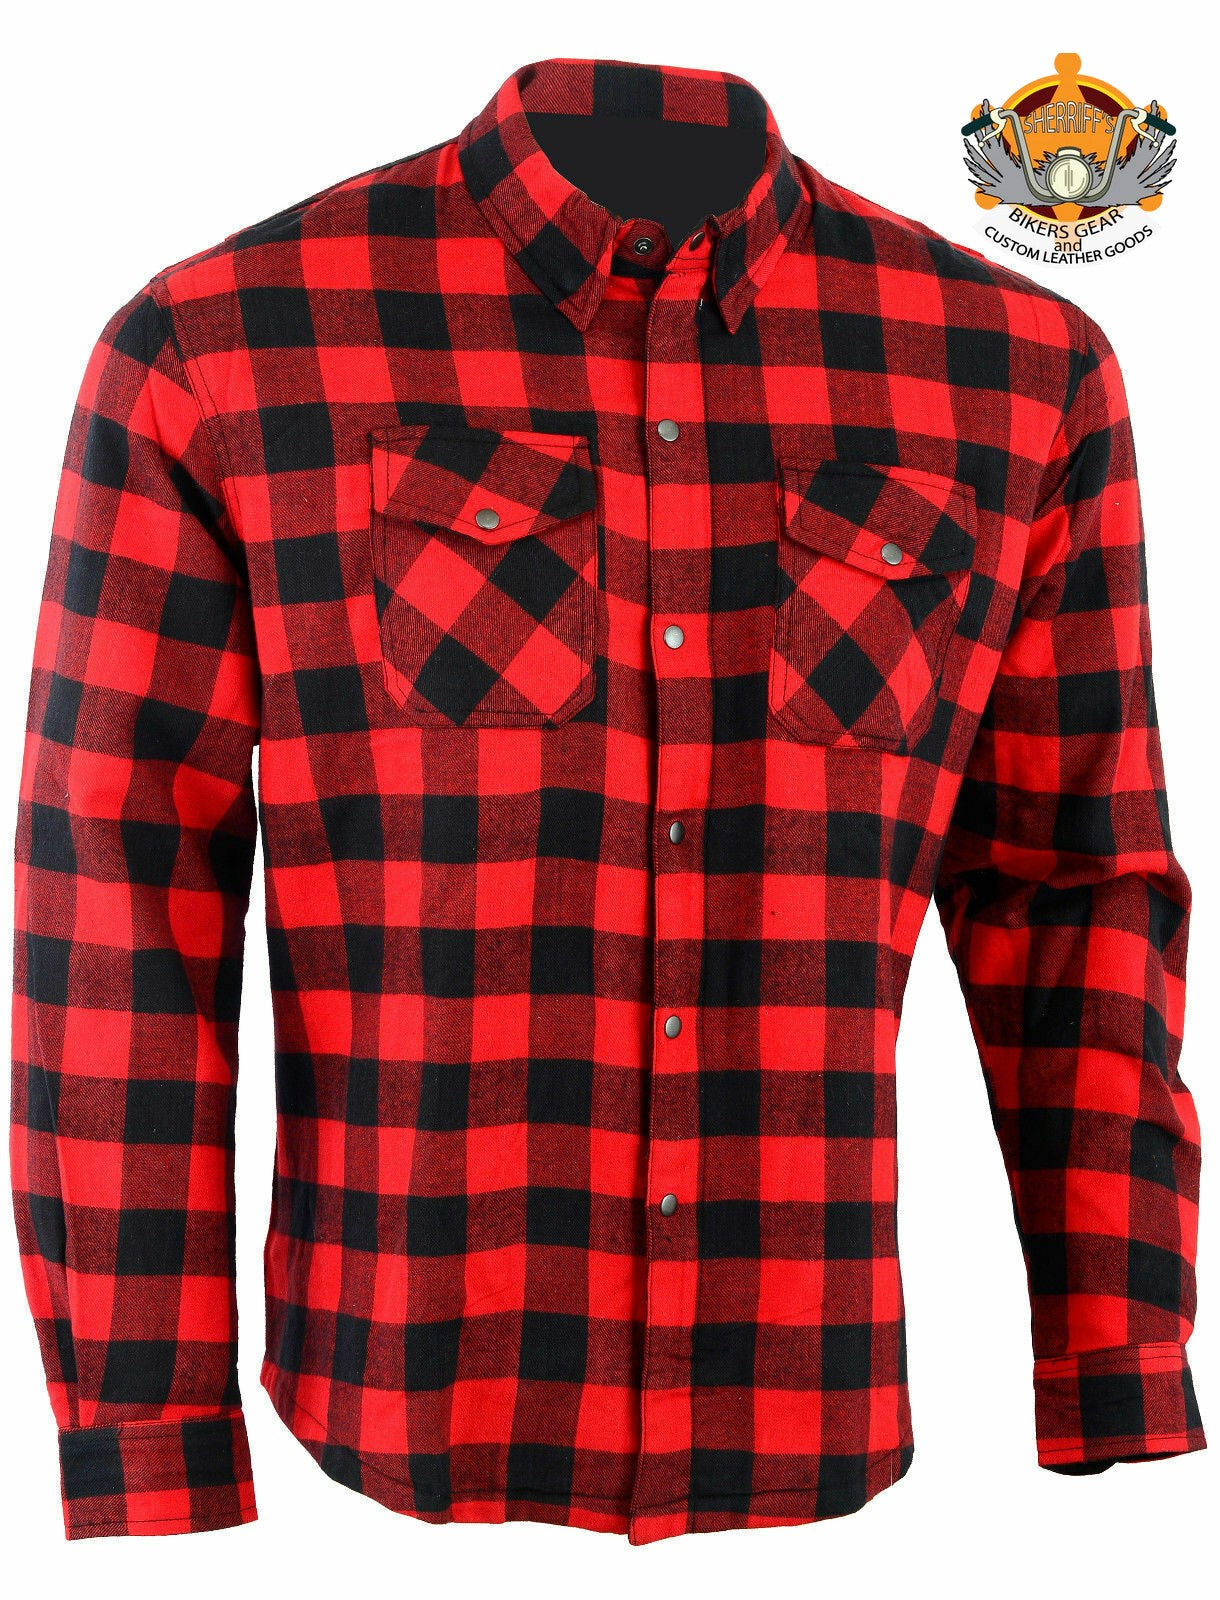 Flannel Shirt with Kevlar Lining - Black and Red